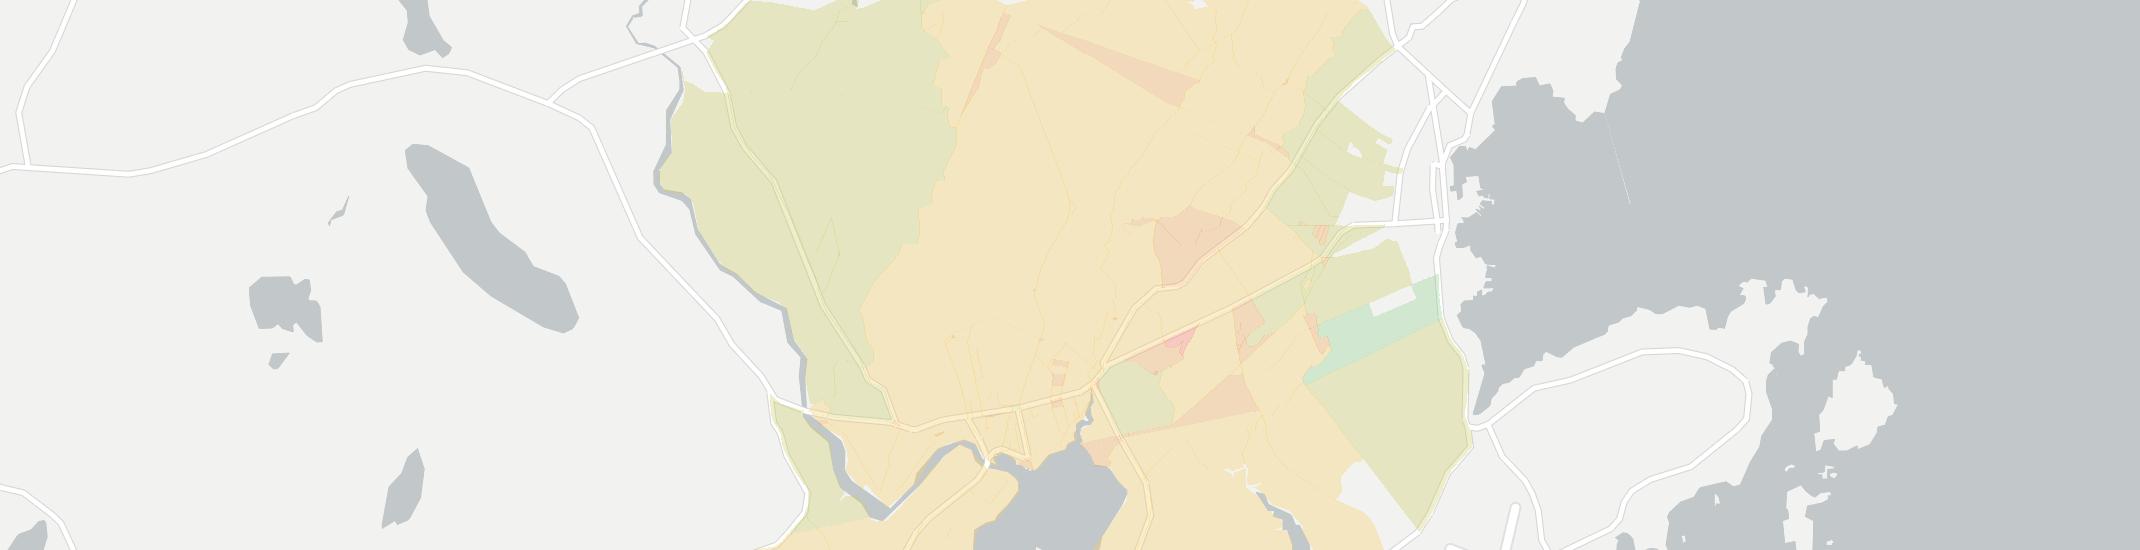 Thomaston Internet Competition Map. Click for interactive map.